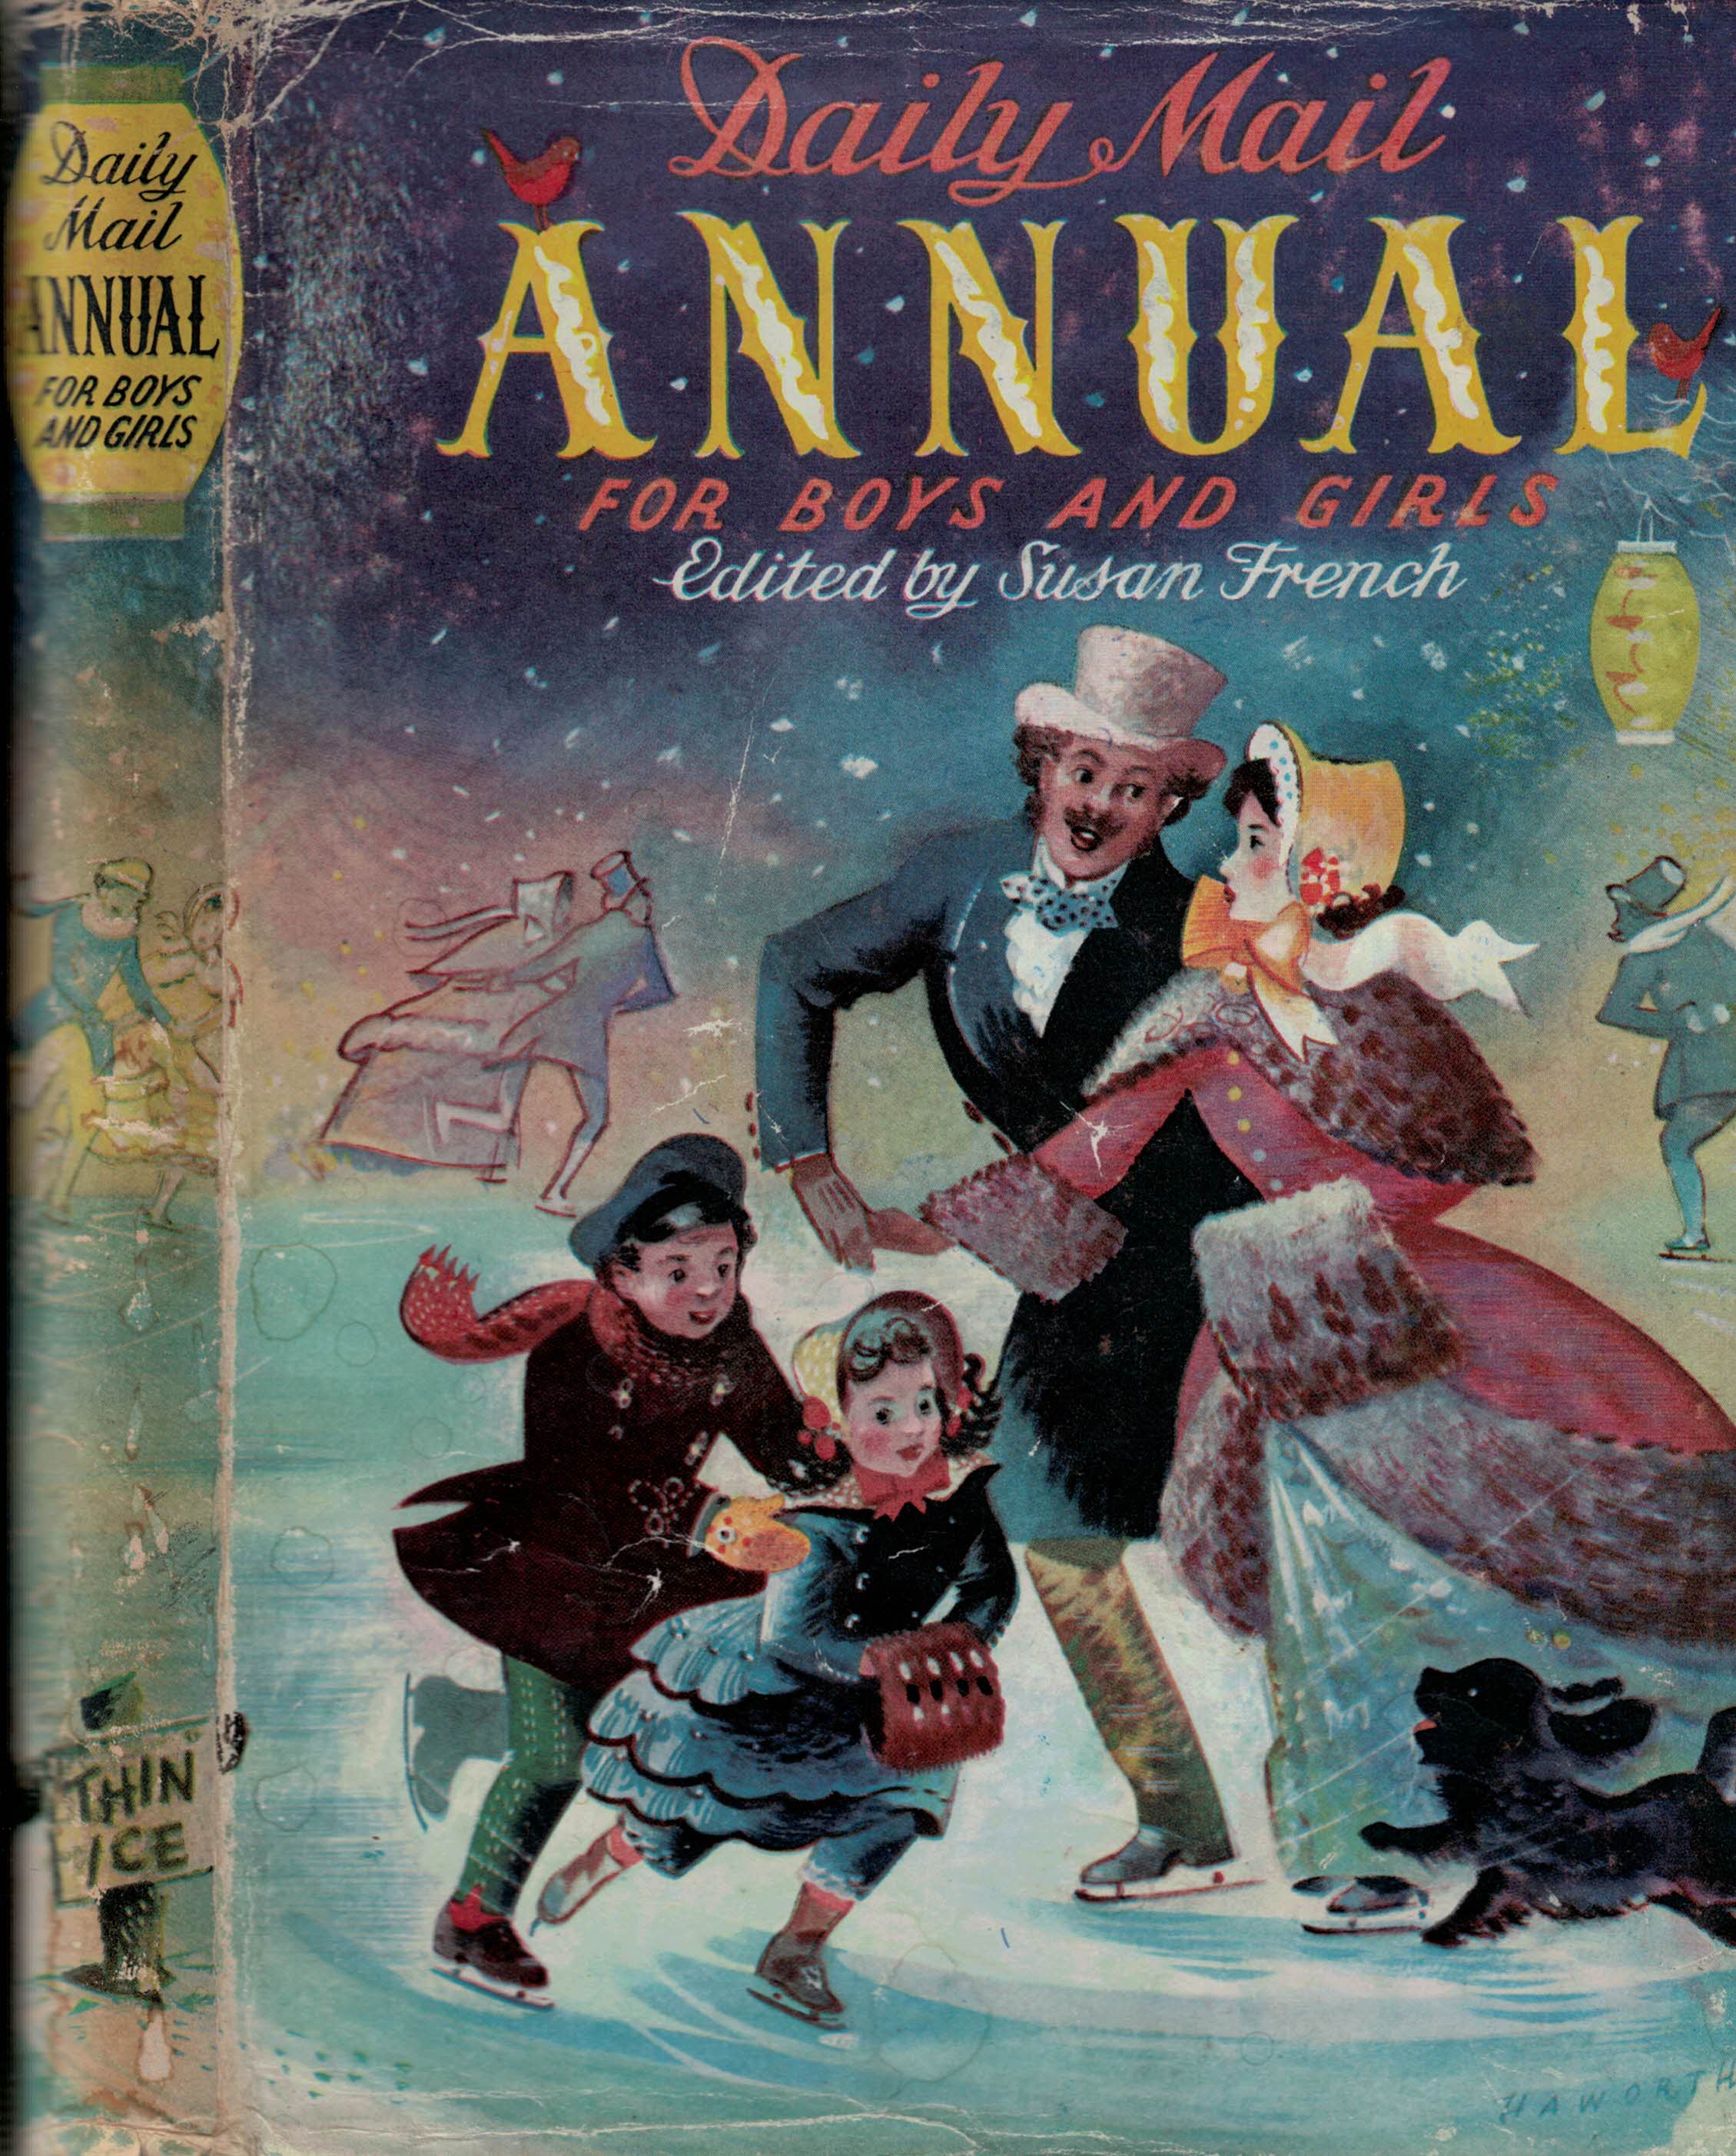 The Daily Mail Annual for Boys and Girls 1952